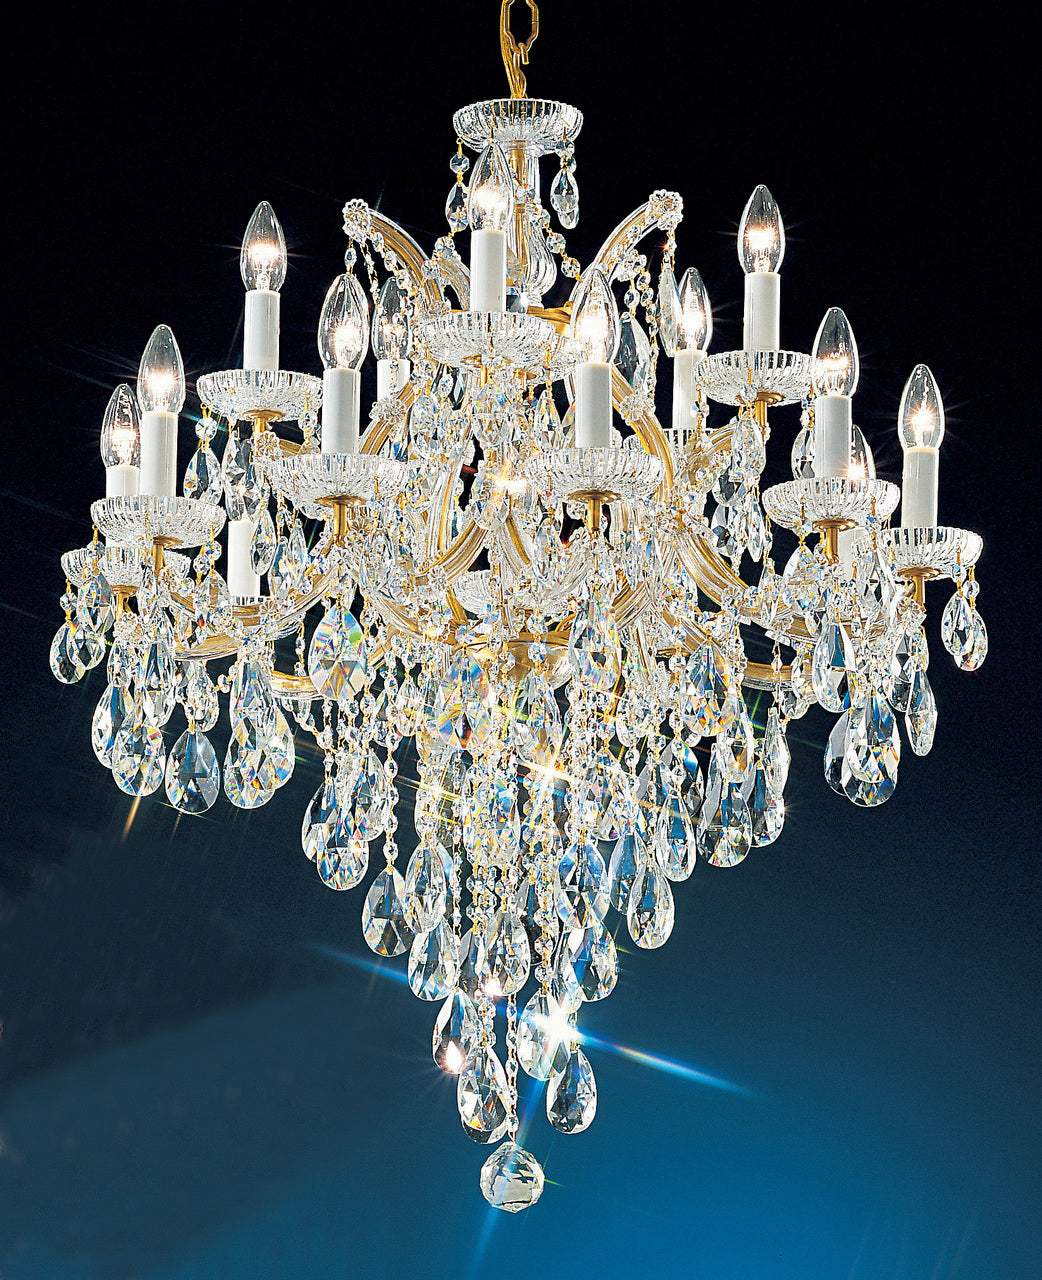 Classic Lighting 8126 OWG C Maria Theresa Traditional Crystal Chandelier in Olde World Gold (Imported from Italy)